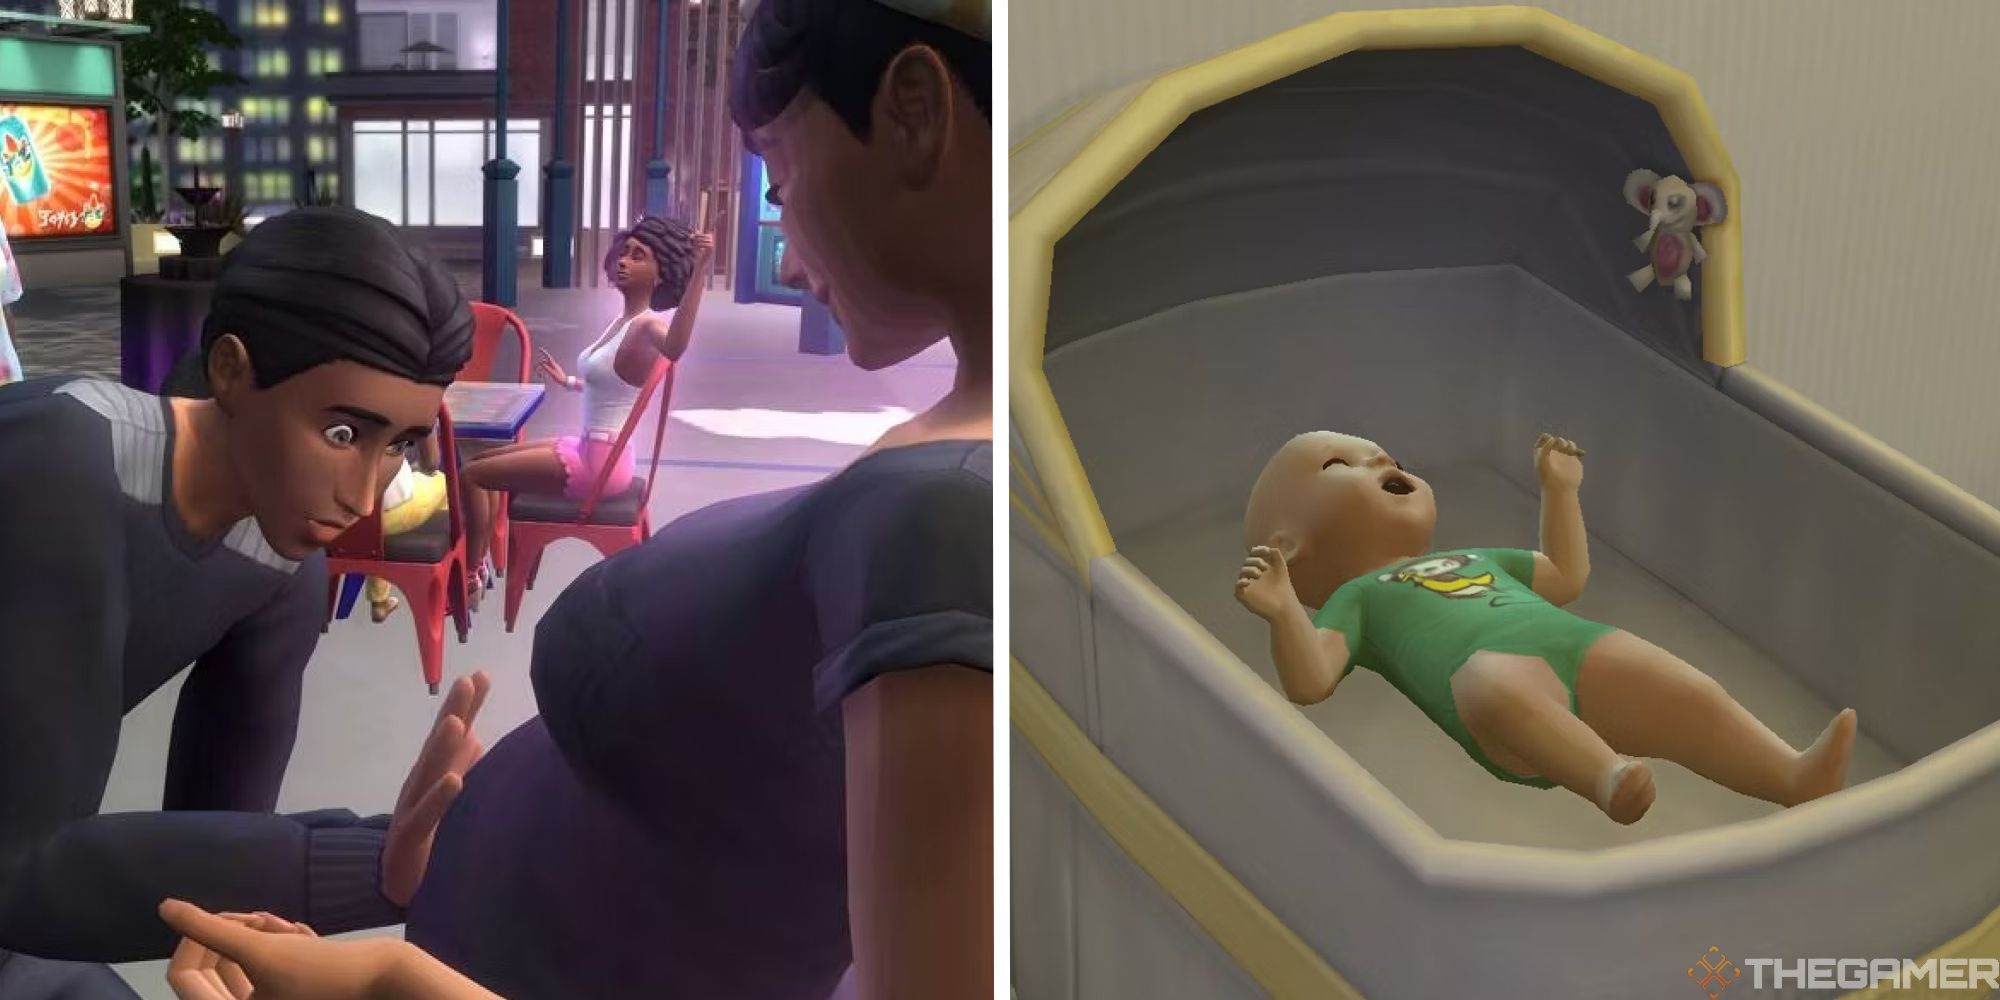 sims 4 person touching a pregnant sims stomach next to image of baby in crib